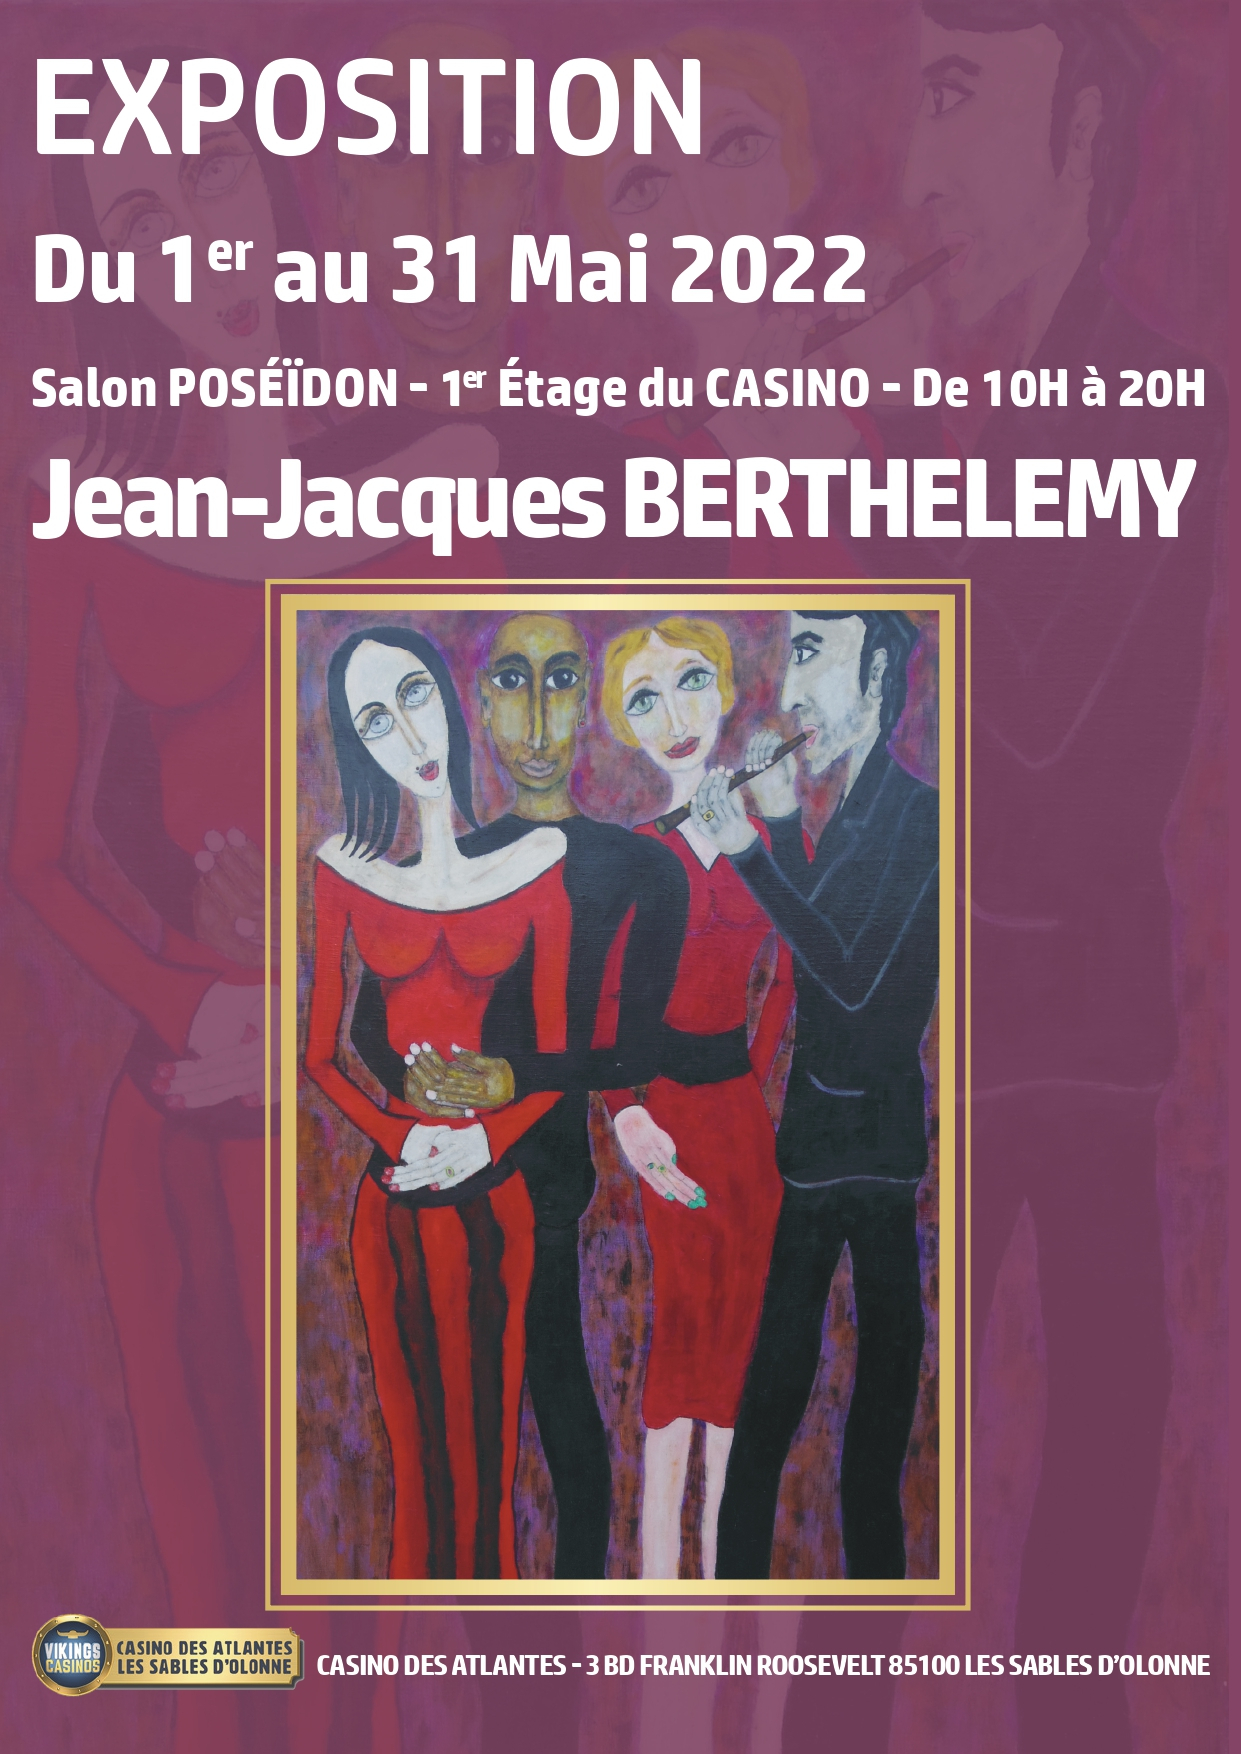 Exposition Jean-Jacques BERTHELEMY